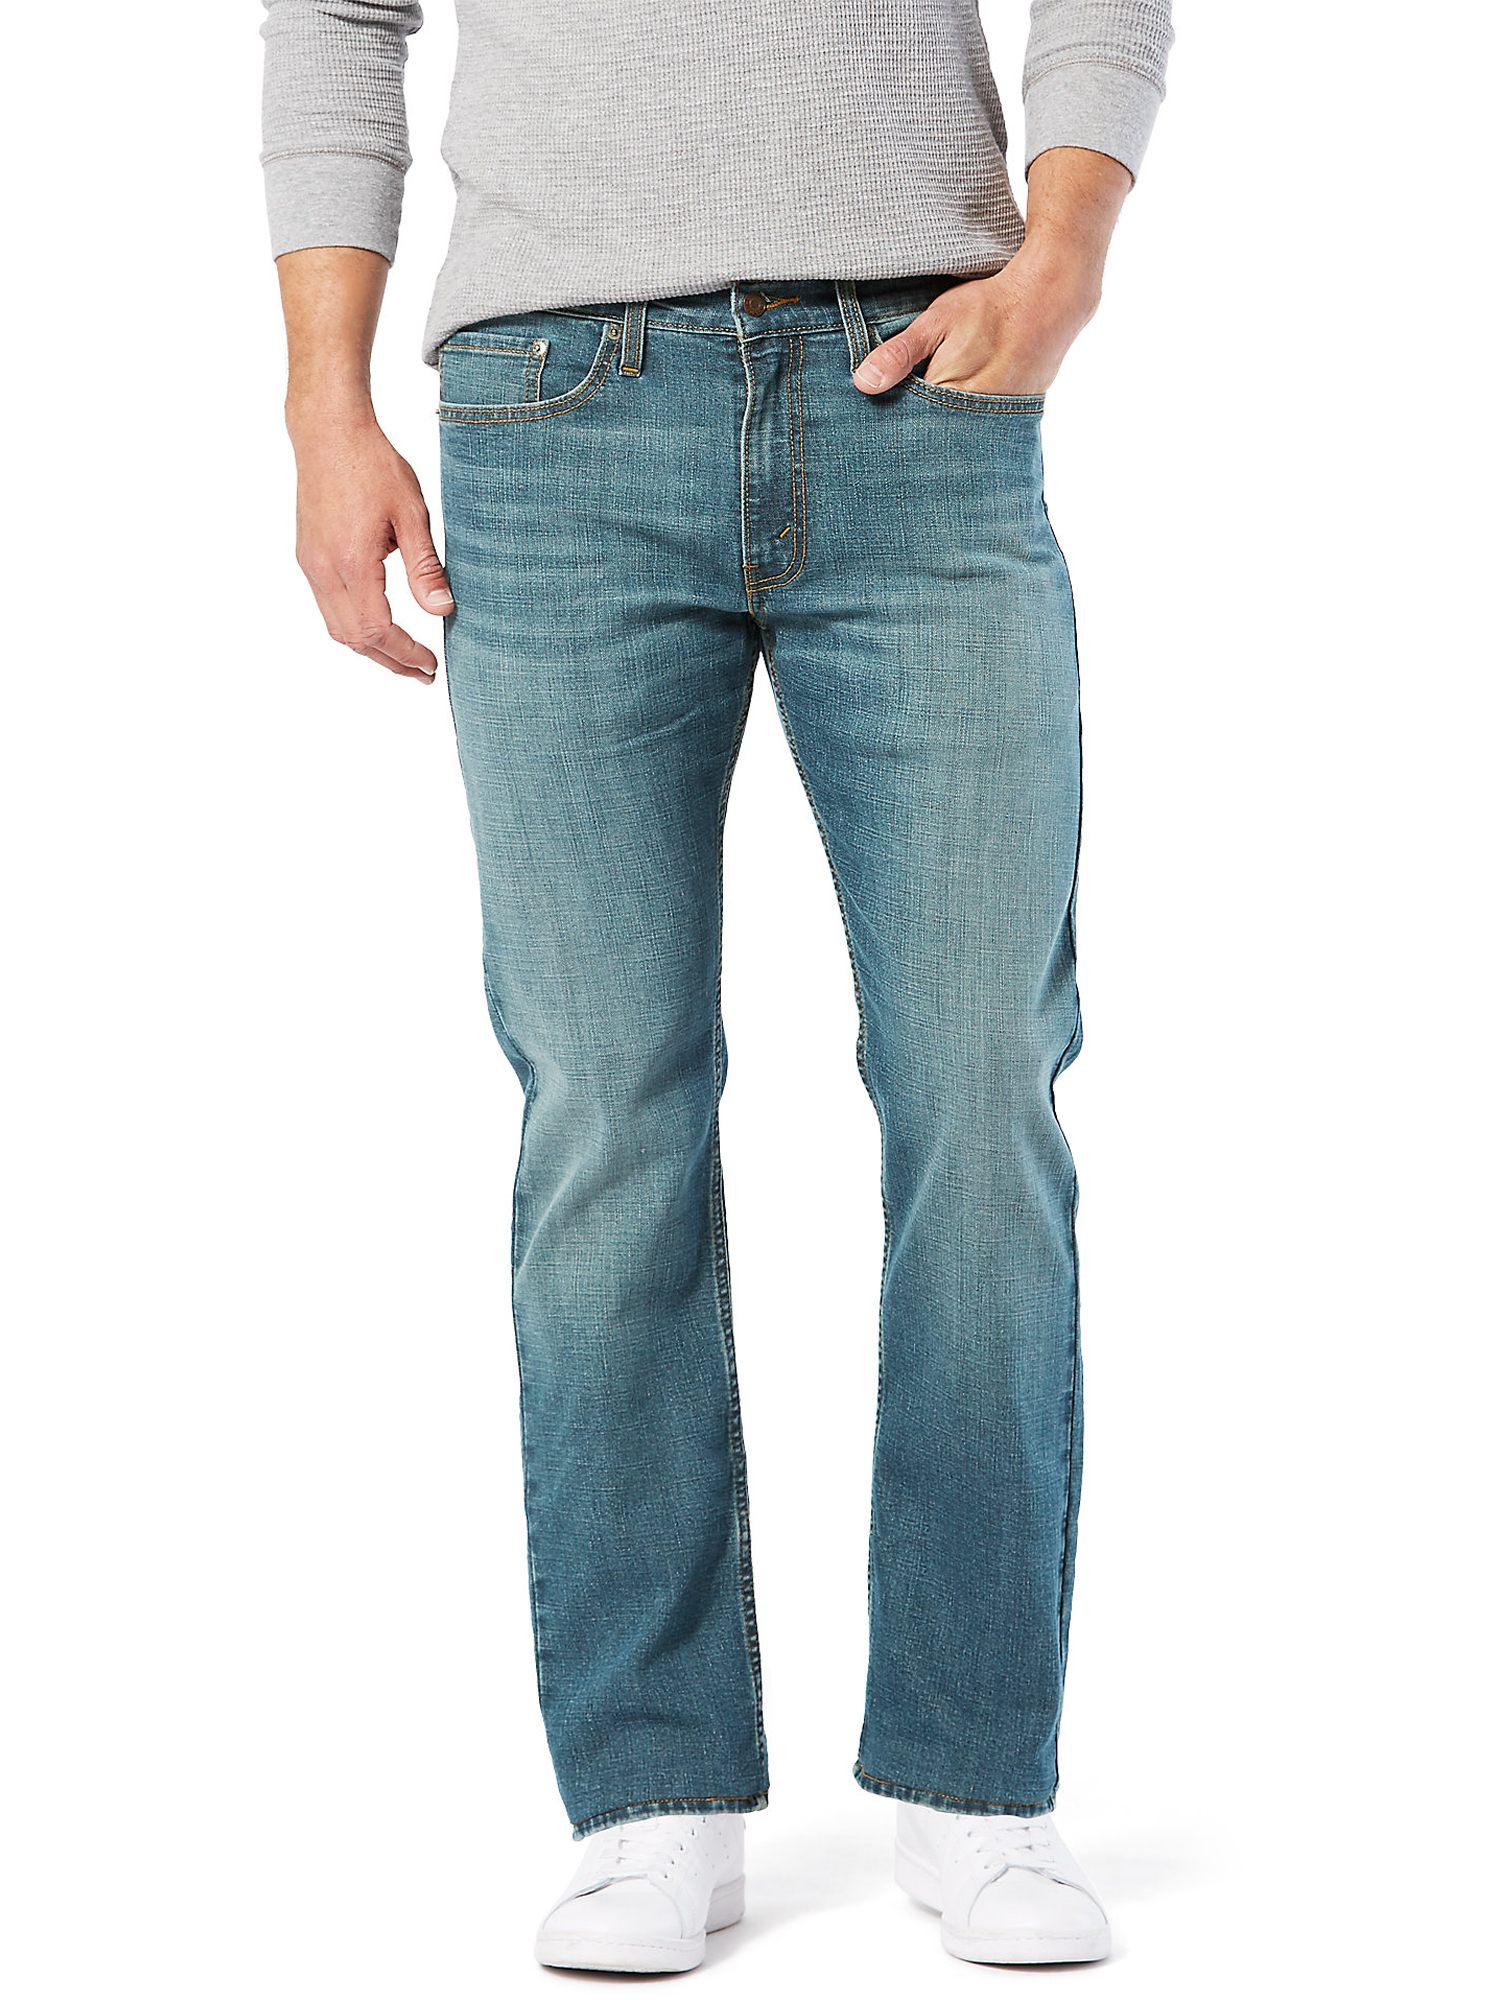 Signature by Levi Strauss & Co. Men's and Big and Tall Straight Fit Jeans - image 1 of 6